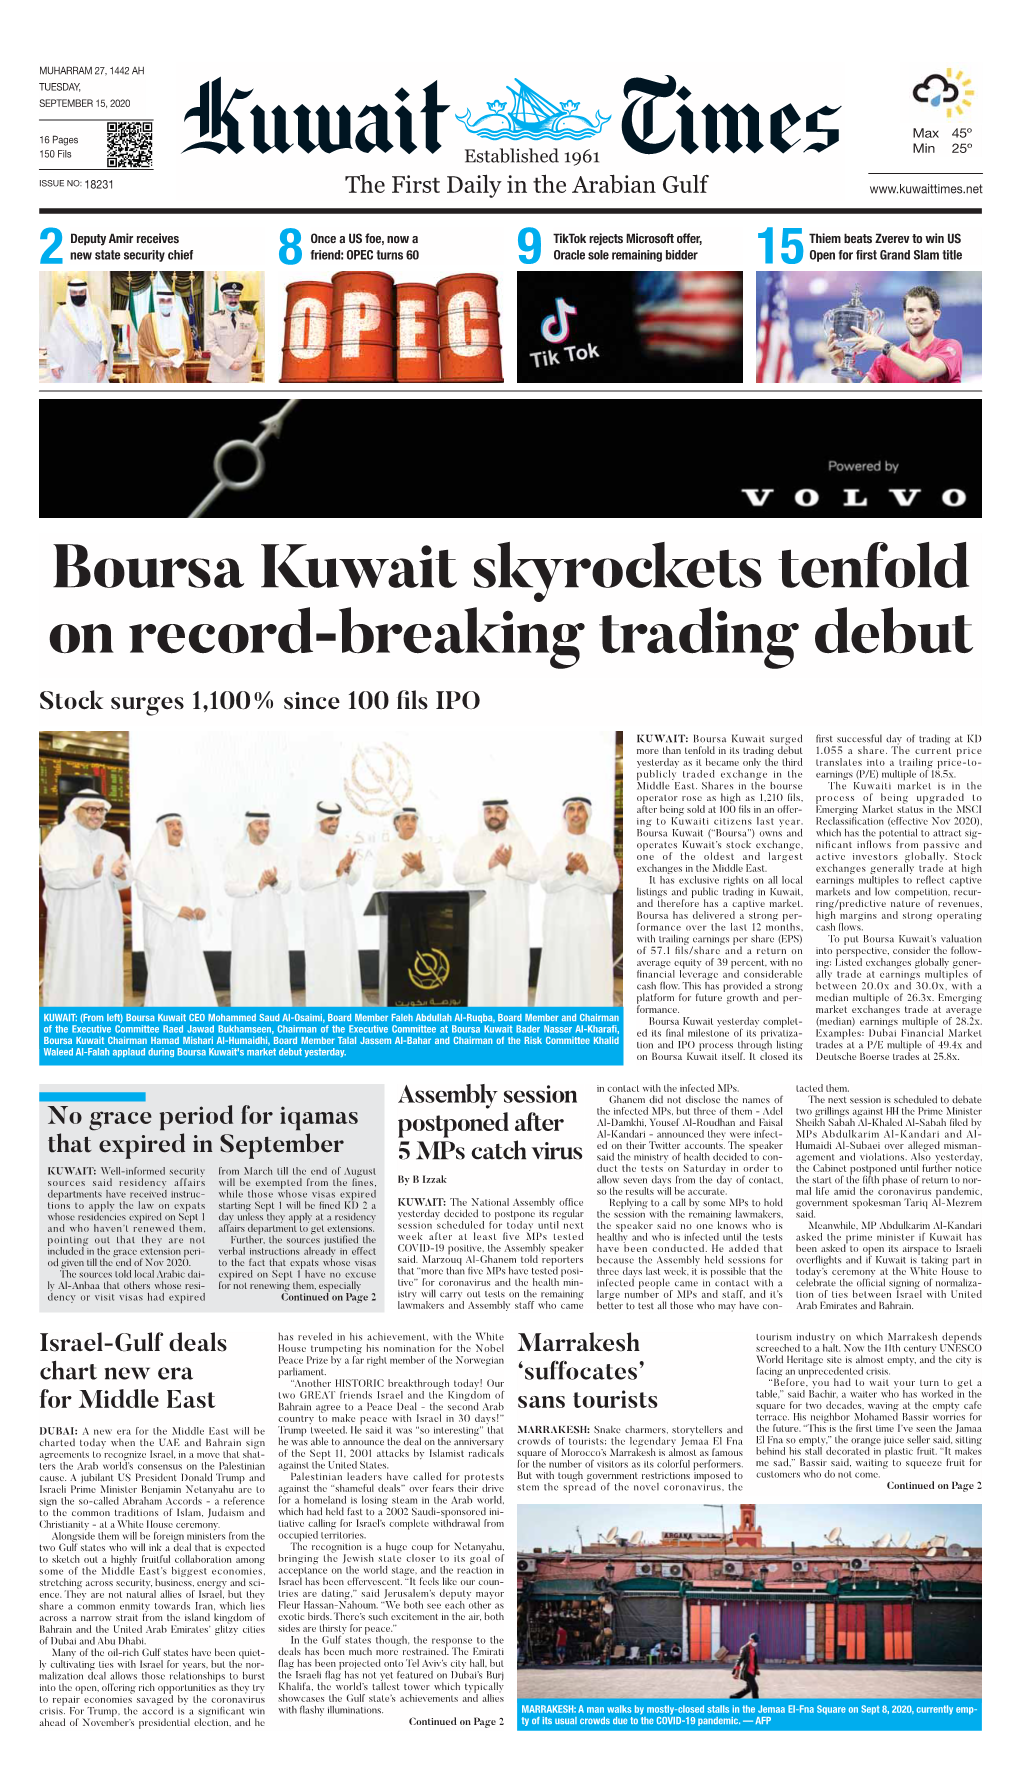 Boursa Kuwait Skyrockets Tenfold on Record-Breaking Trading Debut Stock Surges 1,100% Since 100 Fils IPO